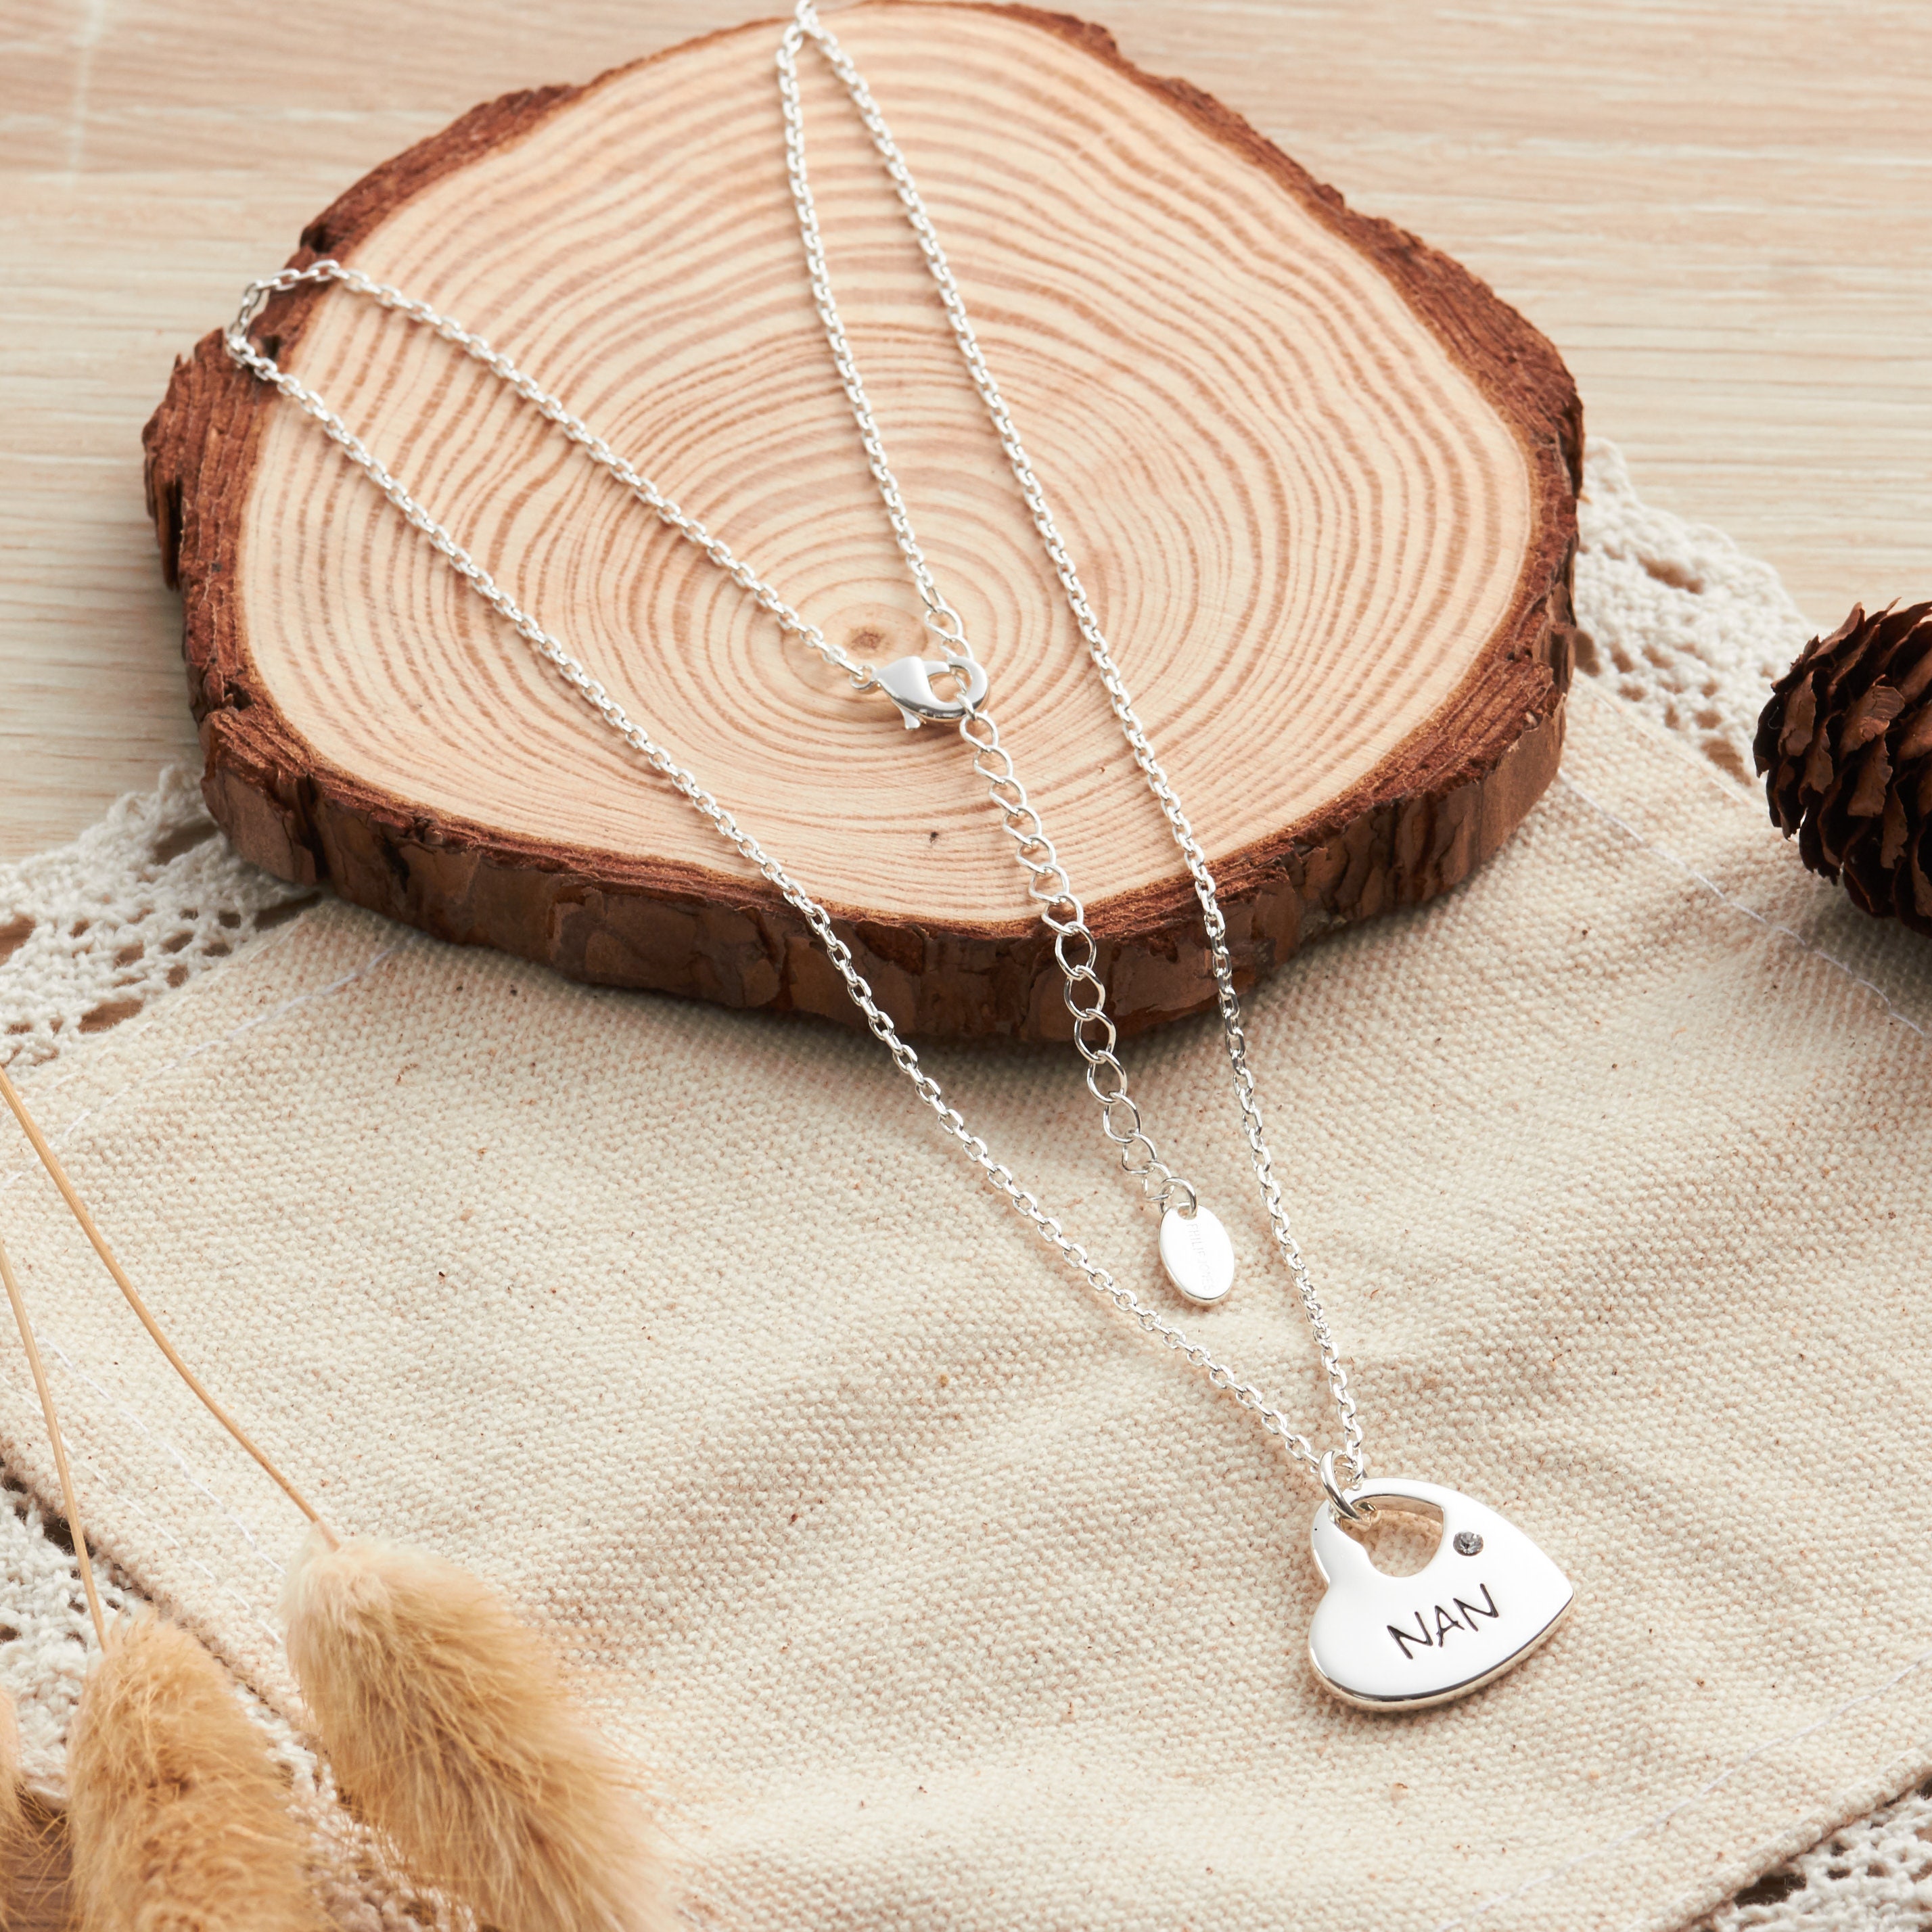 Reclaimed Vintage Inspired necklace with heart Nan pendant | ASOS